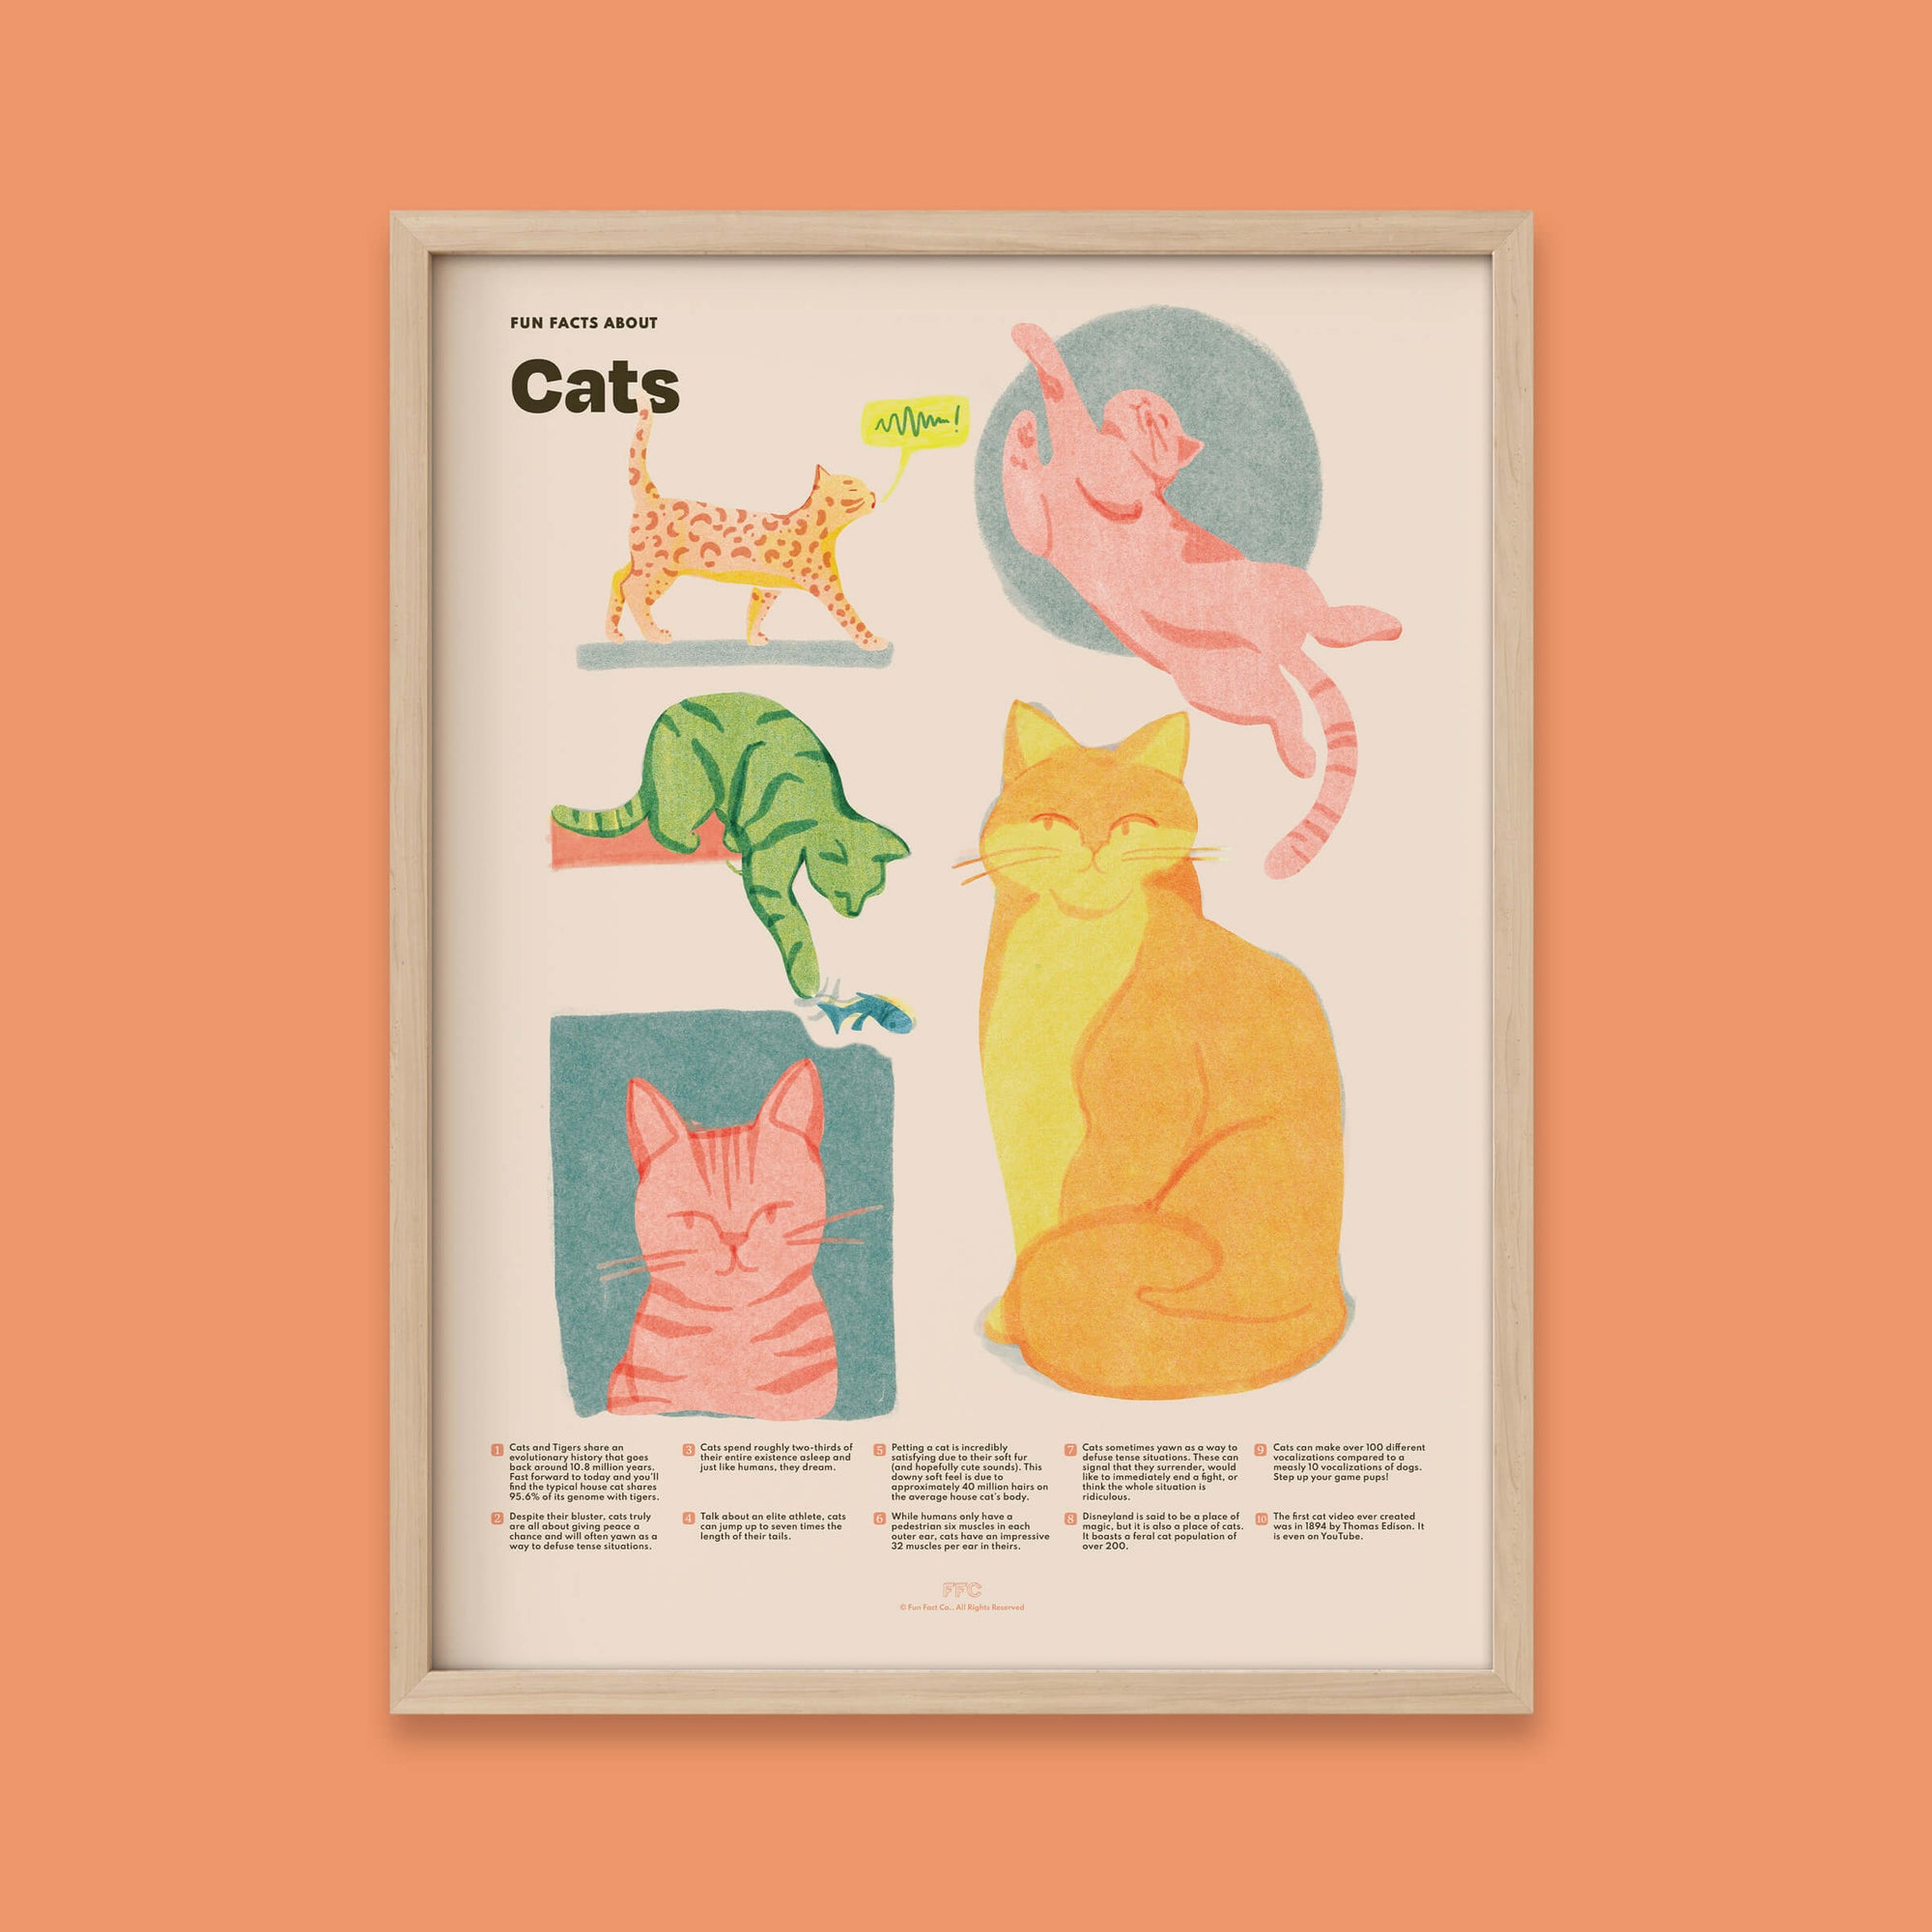 Cat Fun Facts Print, Educational Illustrated Poster by Fun Fact Co - Natural Frame